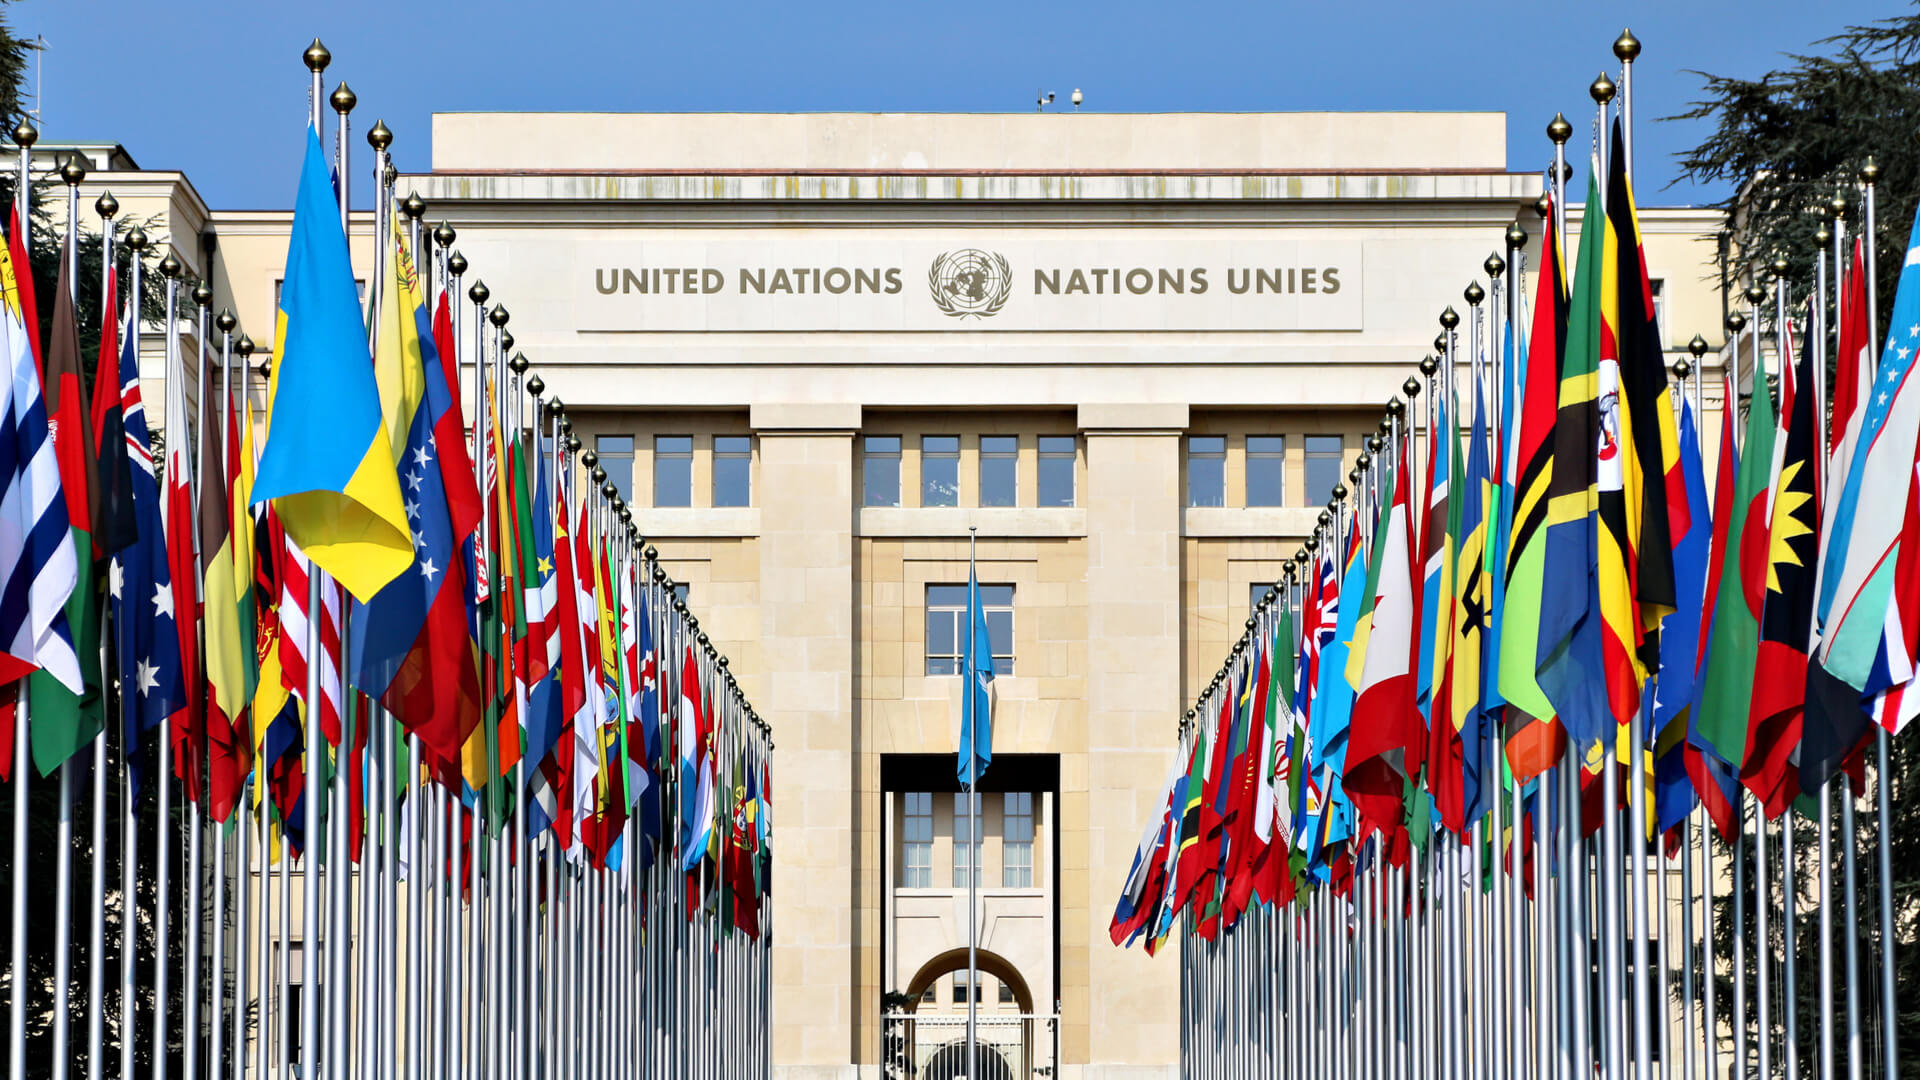 The Palace of Nations, headquarters of the United Nations in Geneva, Switzerland